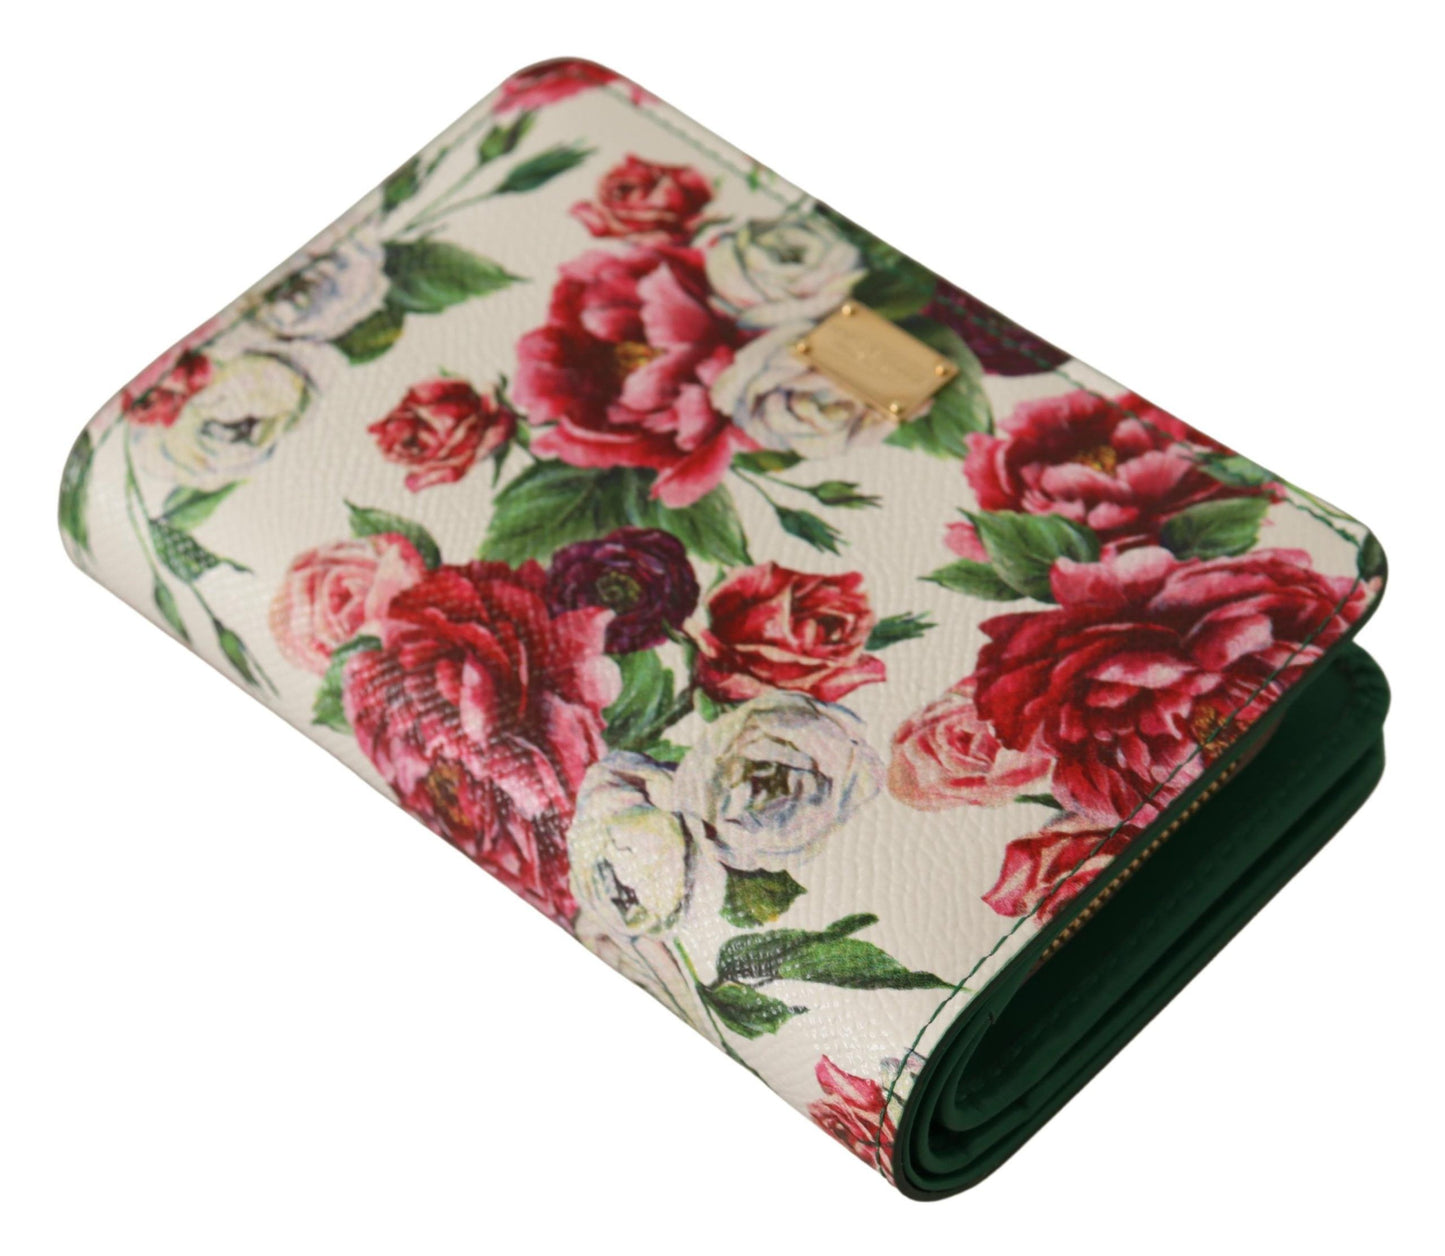 Multicolor Floral Leather Continental Wallet